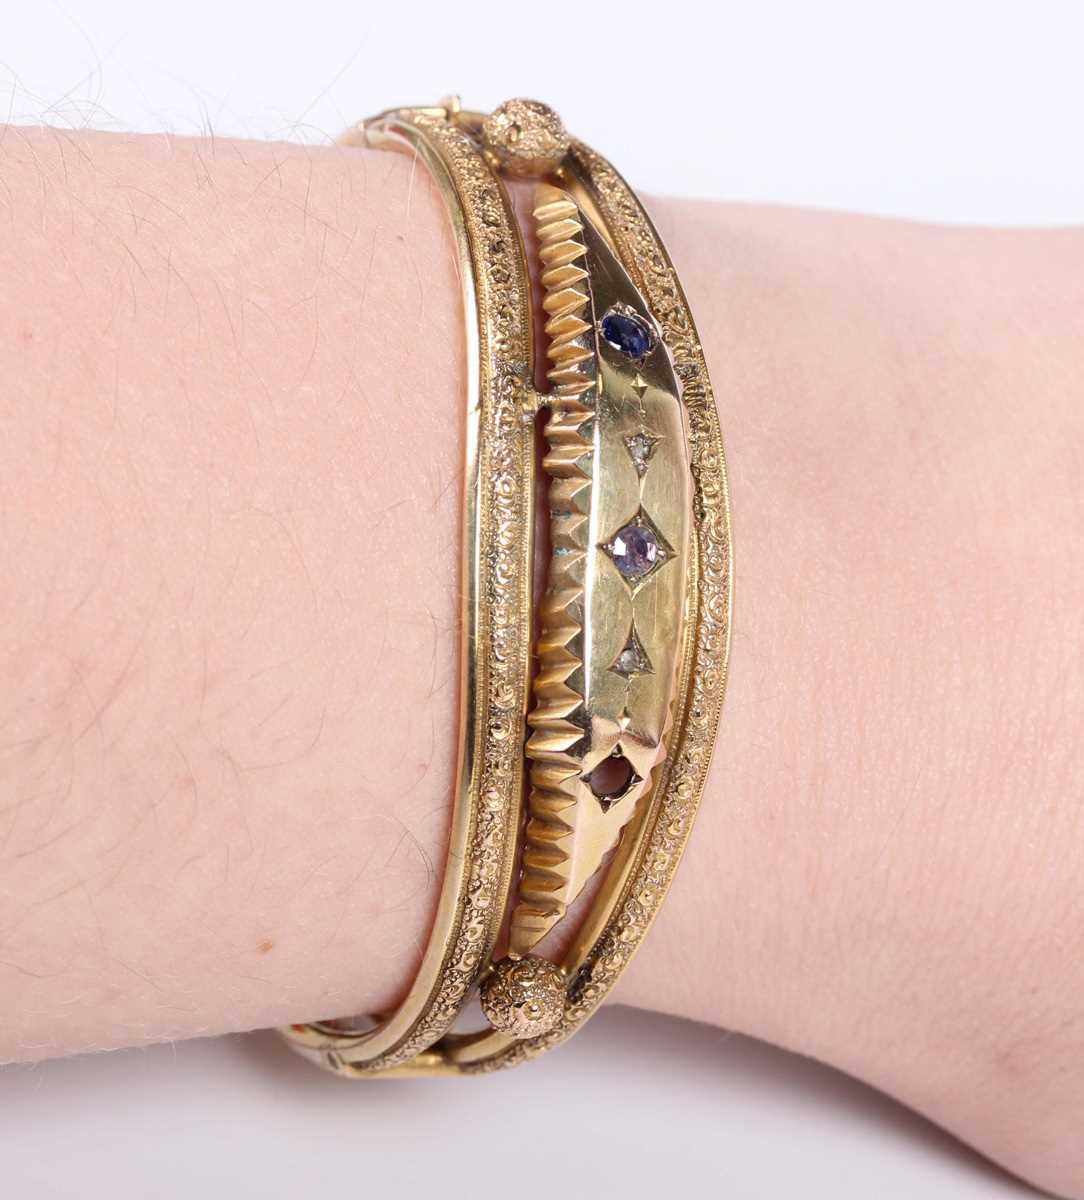 An Edwardian 9ct gold, diamond, blue gem and mauve paste set oval hinged bangle, decorated with - Image 5 of 5